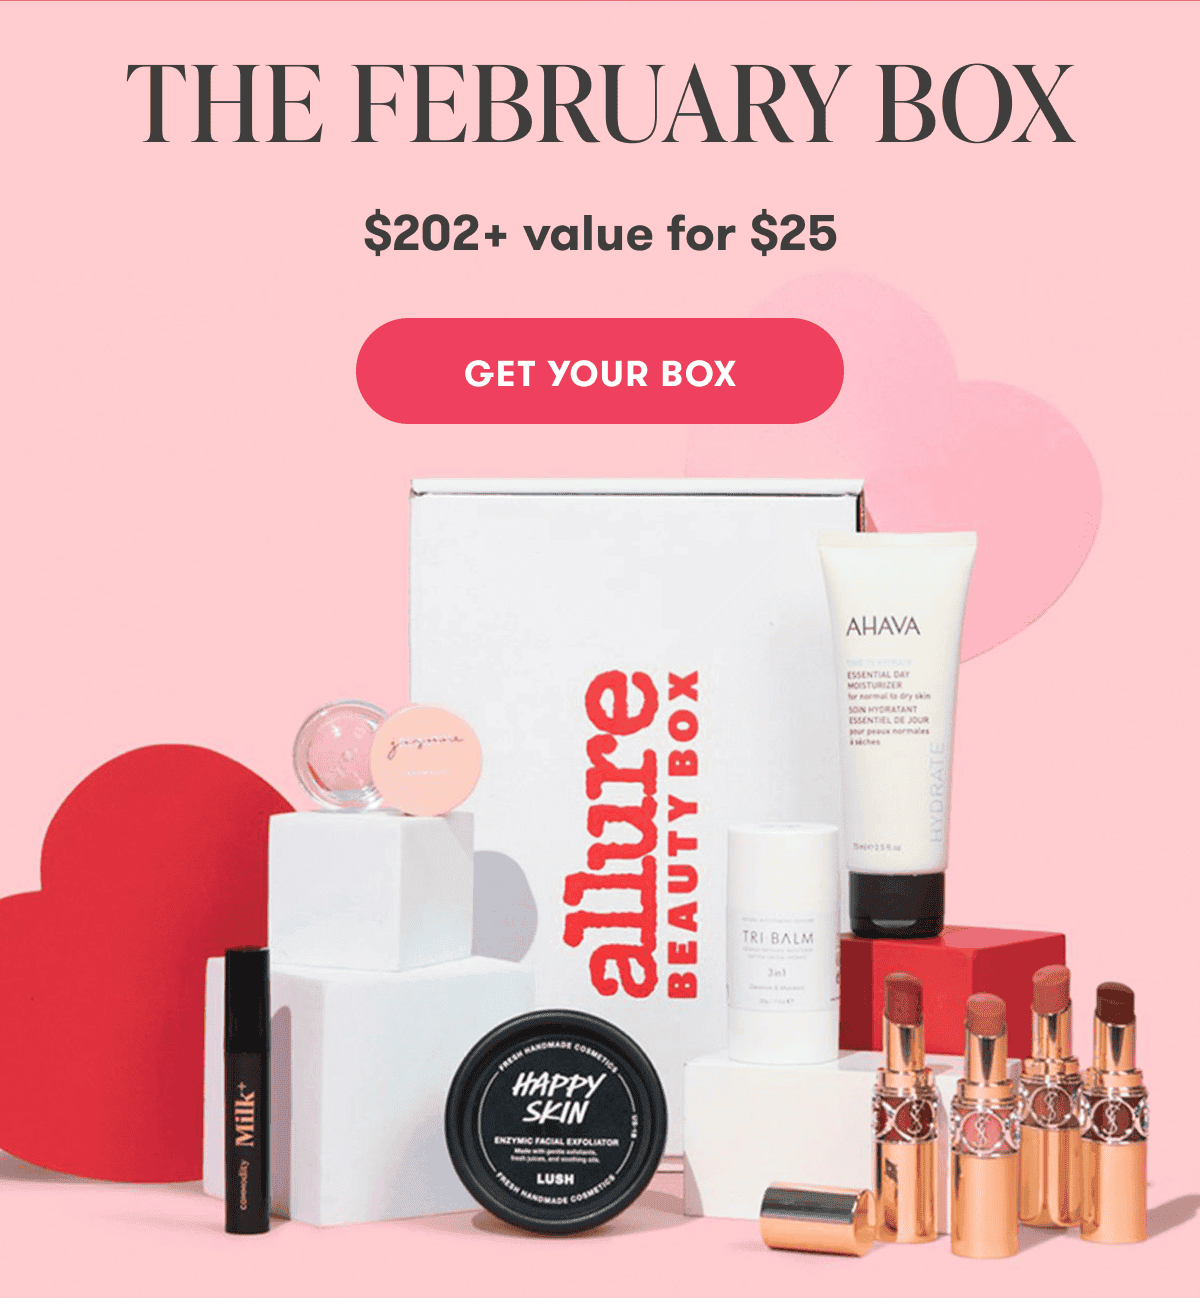 The February Box. \\$202+ value for \\$25 \\$208. Get your box.